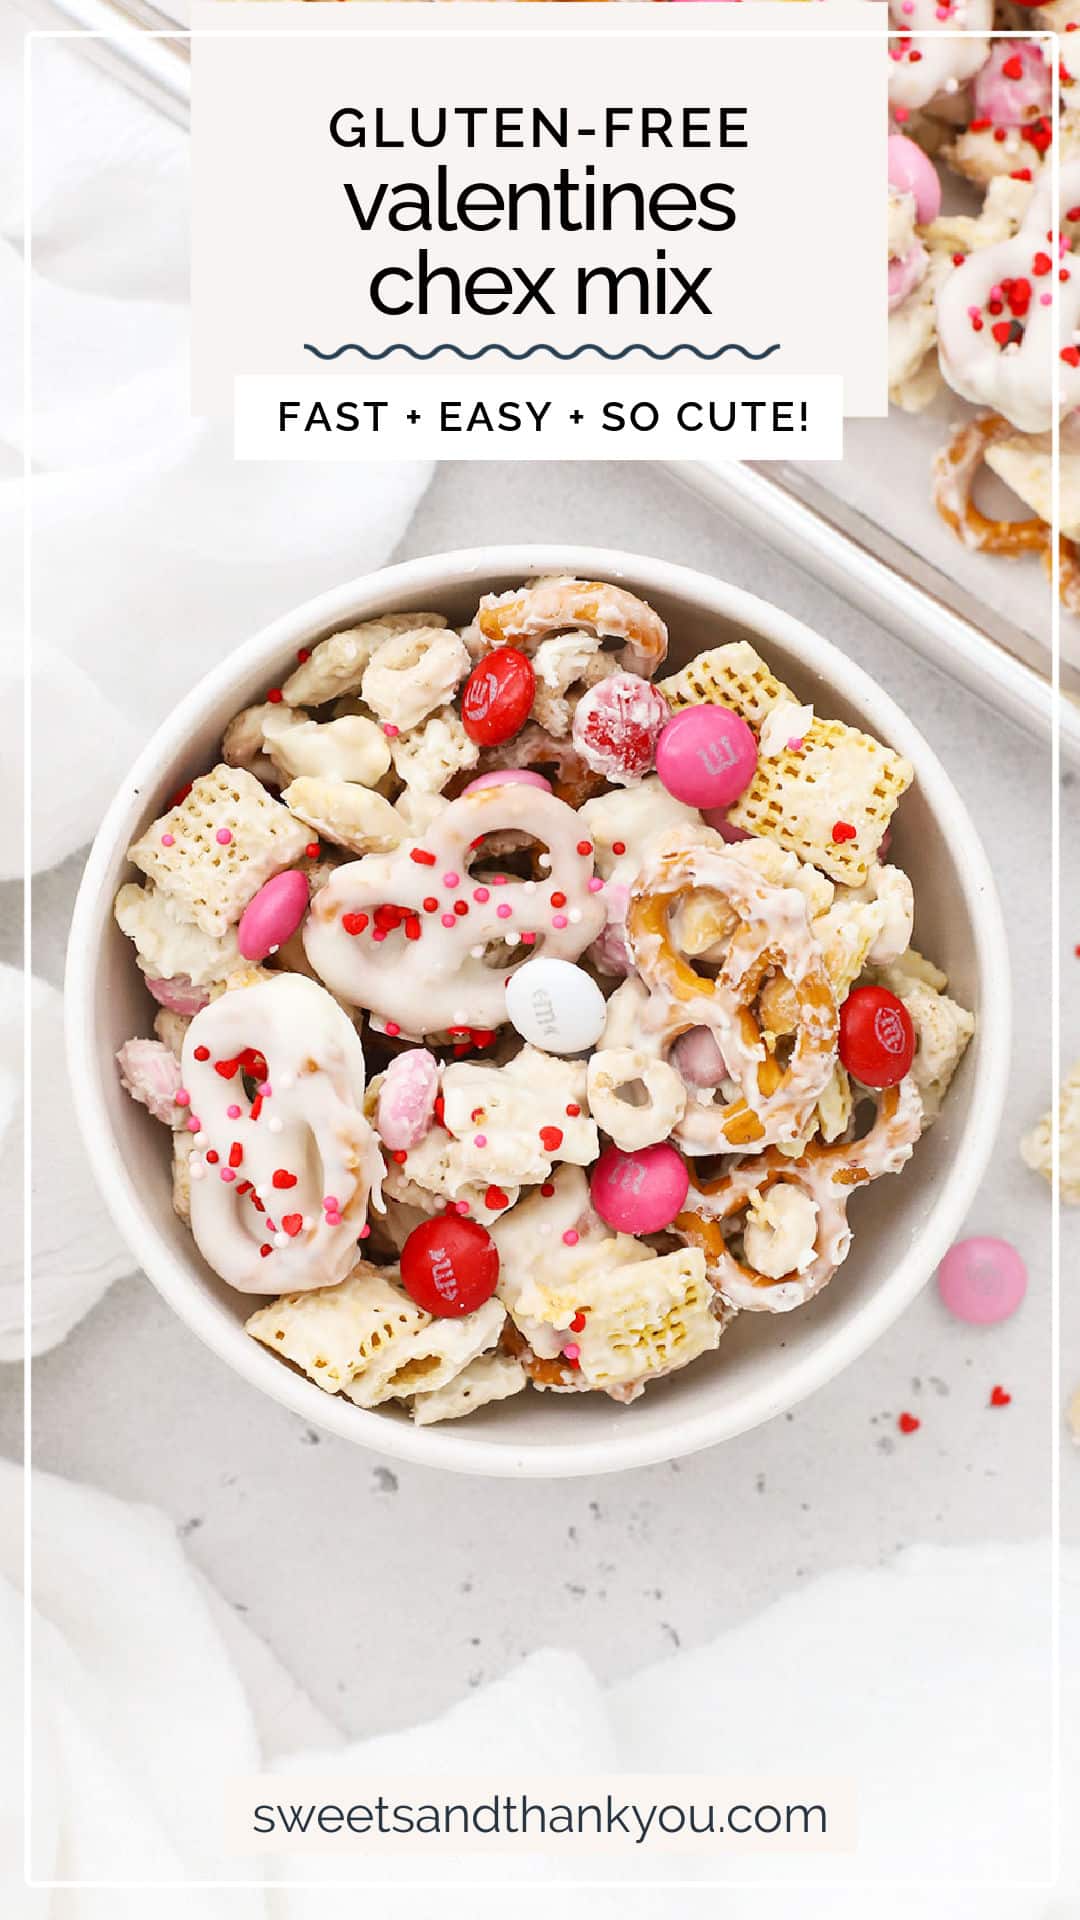 This crispy, crunchy Gluten-Free Valentines Chex Mix recipe is an easy Valentine's treat to share with friends! Don't miss our tips for making it extra pretty. Valentines snack mix / gluten free valentines treat / gluten free valentines snack / gluten free valentines dessert / gluten free valentines recipe / valentines day chex mix / valentines day recipes / gluten-free snack mix / no bake treat / no-bake valentines treat / no-bake valentines dessert